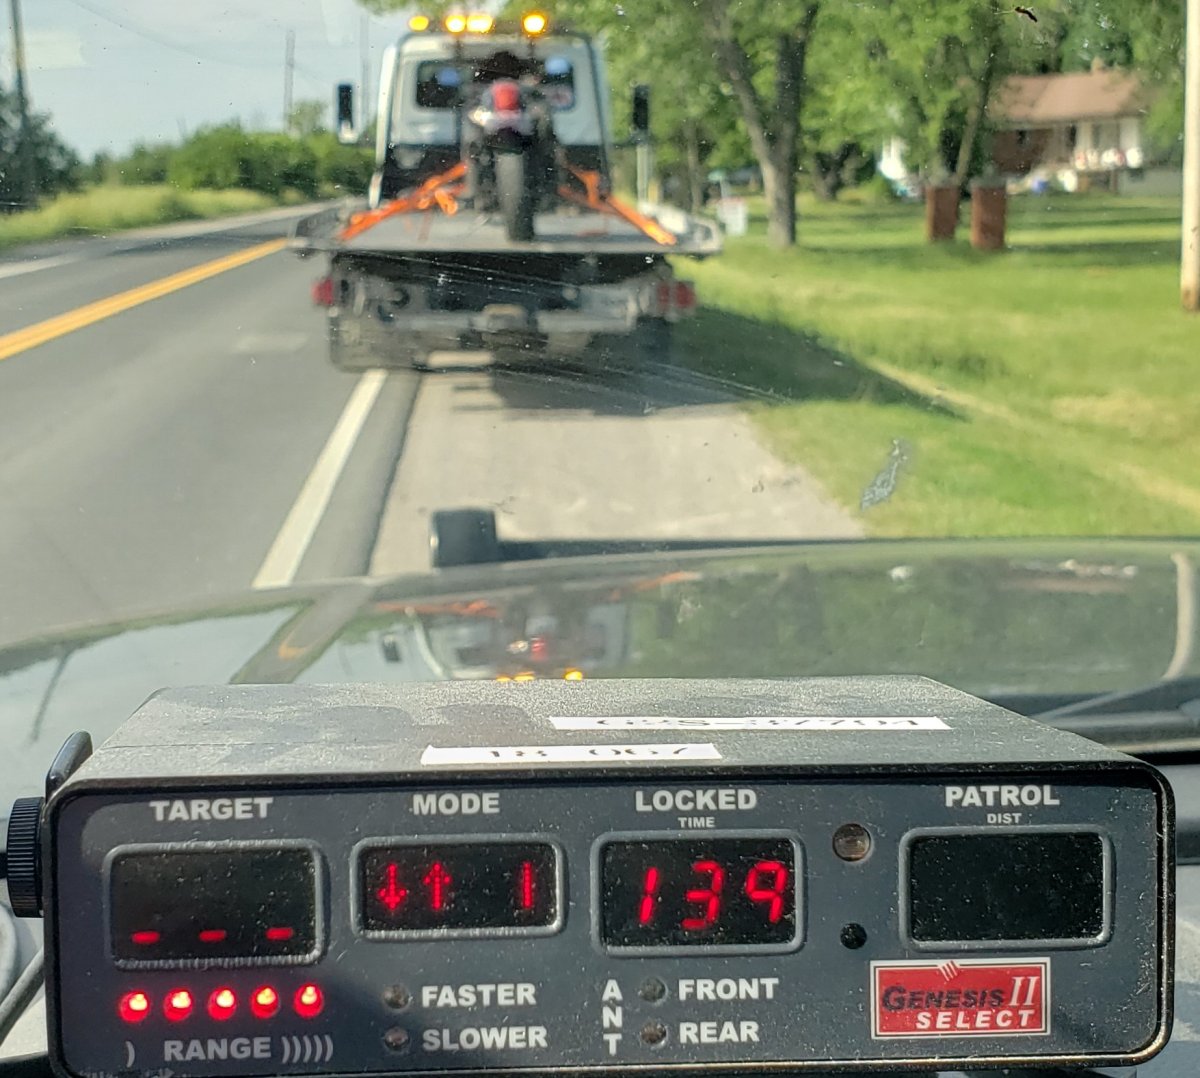 A motorcycle is towed from Wallace Point Road after OPP clocked the vehicle travelling 139 km/h in a posted 60 km/h zone.